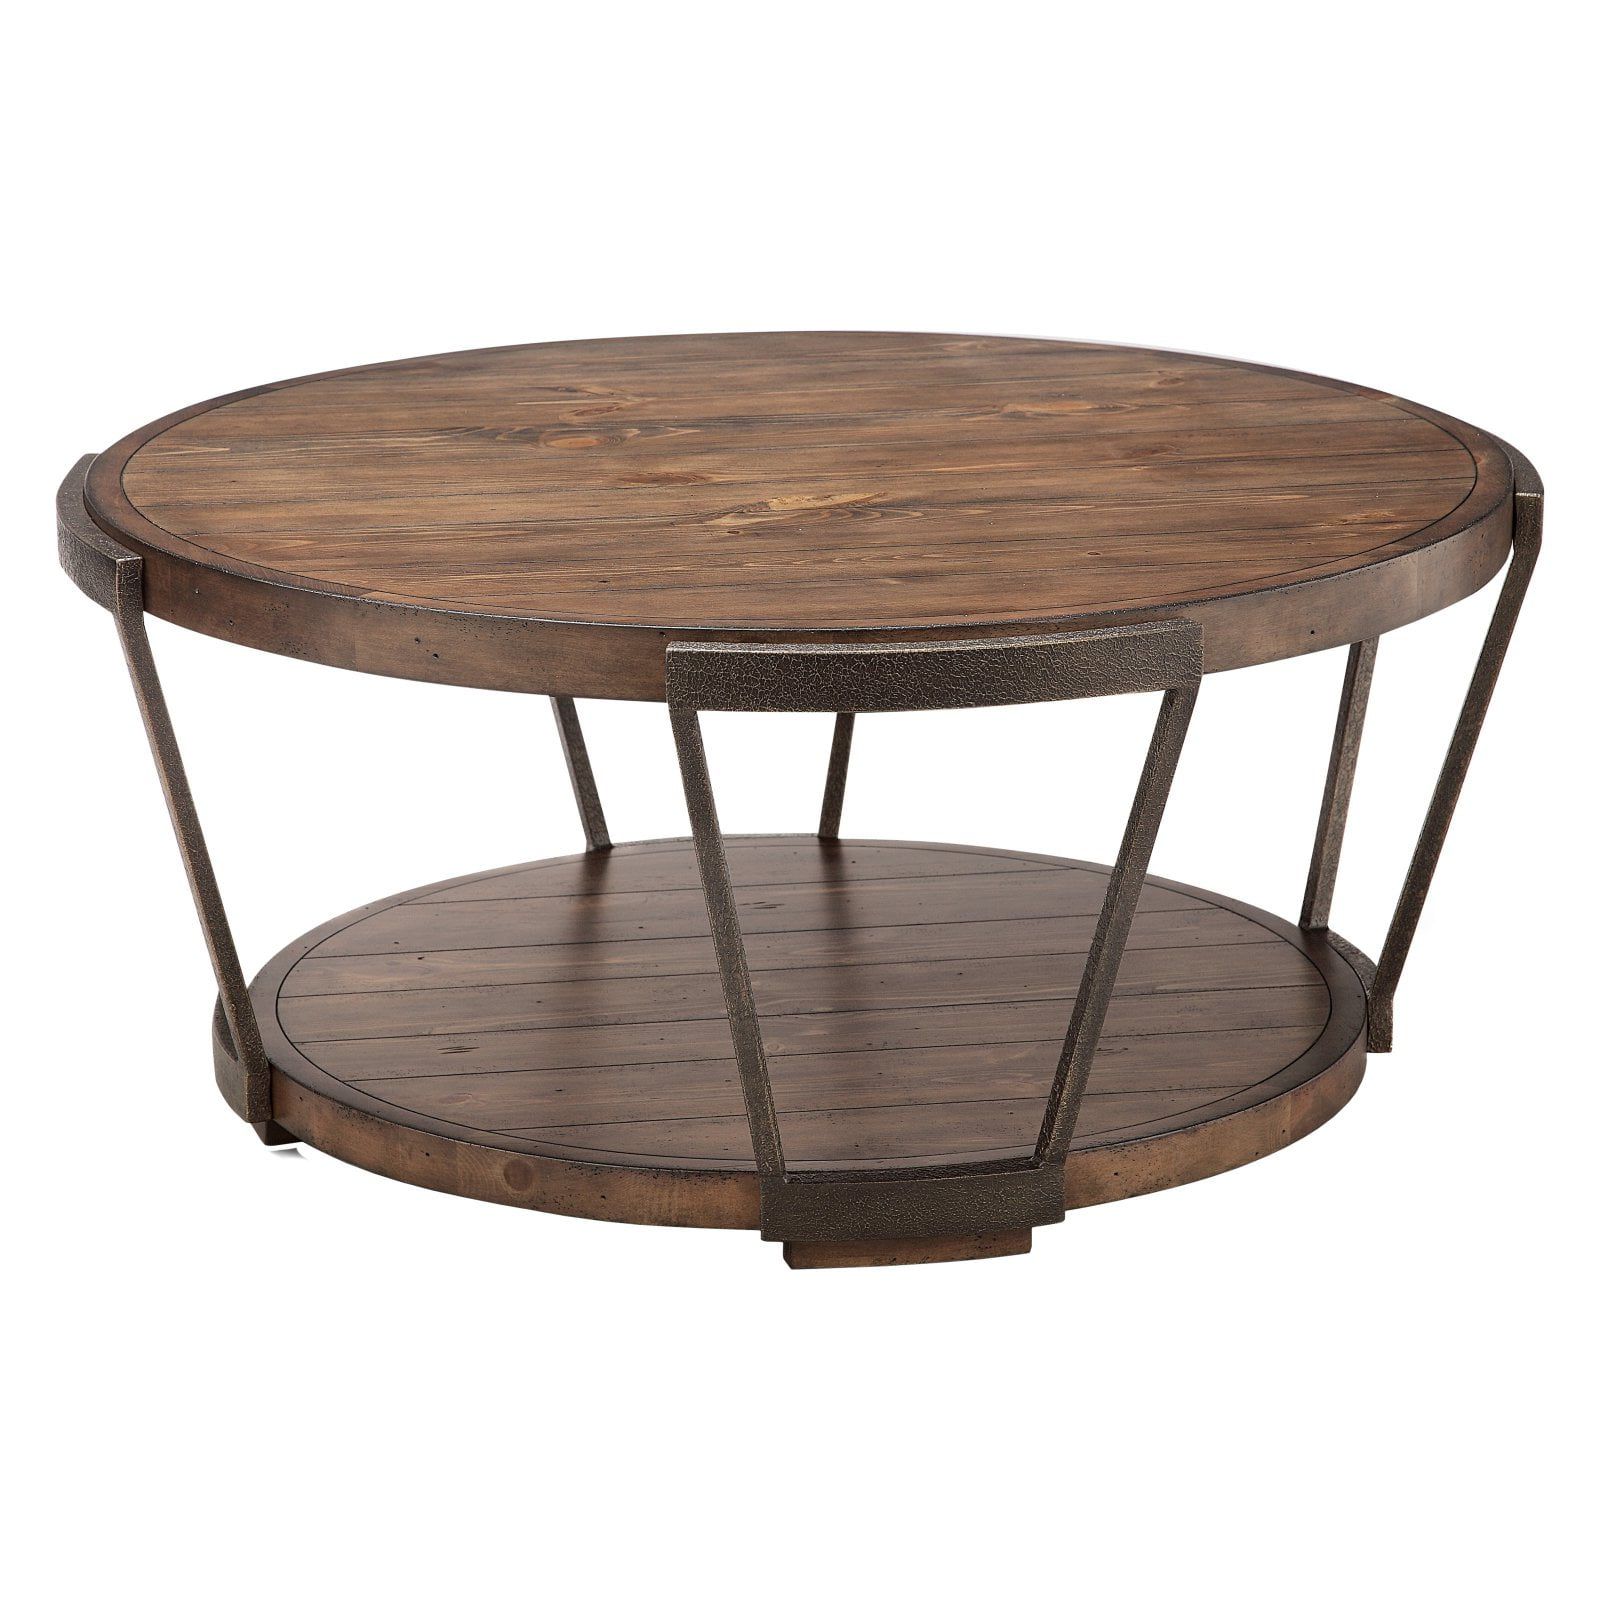 Magnussen Yukon Industrial Round Coffee Table With Casters – Walmart Pertaining To Coffee Tables With Casters (View 15 of 20)